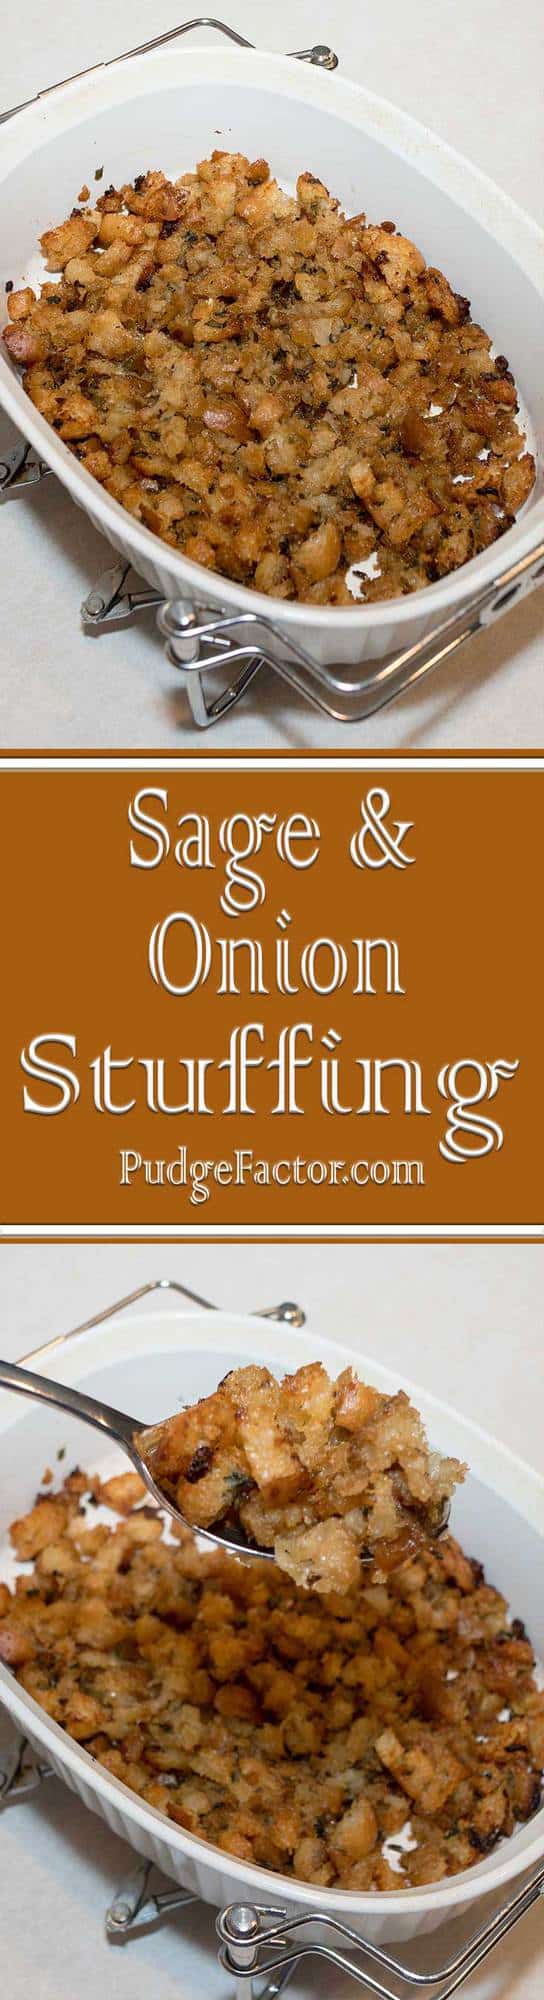 Classic Sage and Onion Stuffing is a snap to make with just a few ingredients.